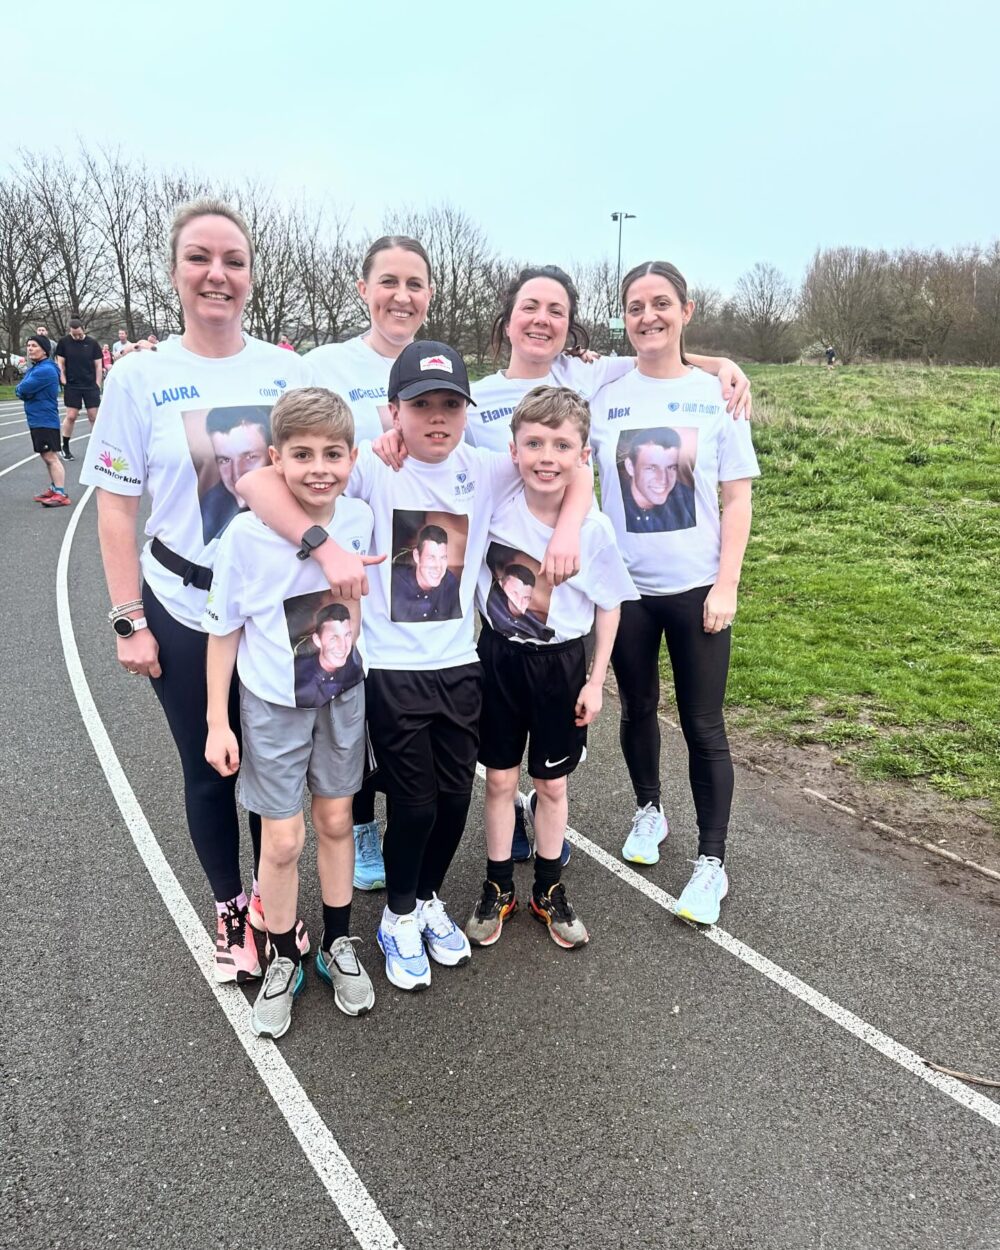 Members of the kNOwKnifeCrime campaign team with their children who are taking part in the relay event tomorrow. Laura's son Harrison is wearing the cap